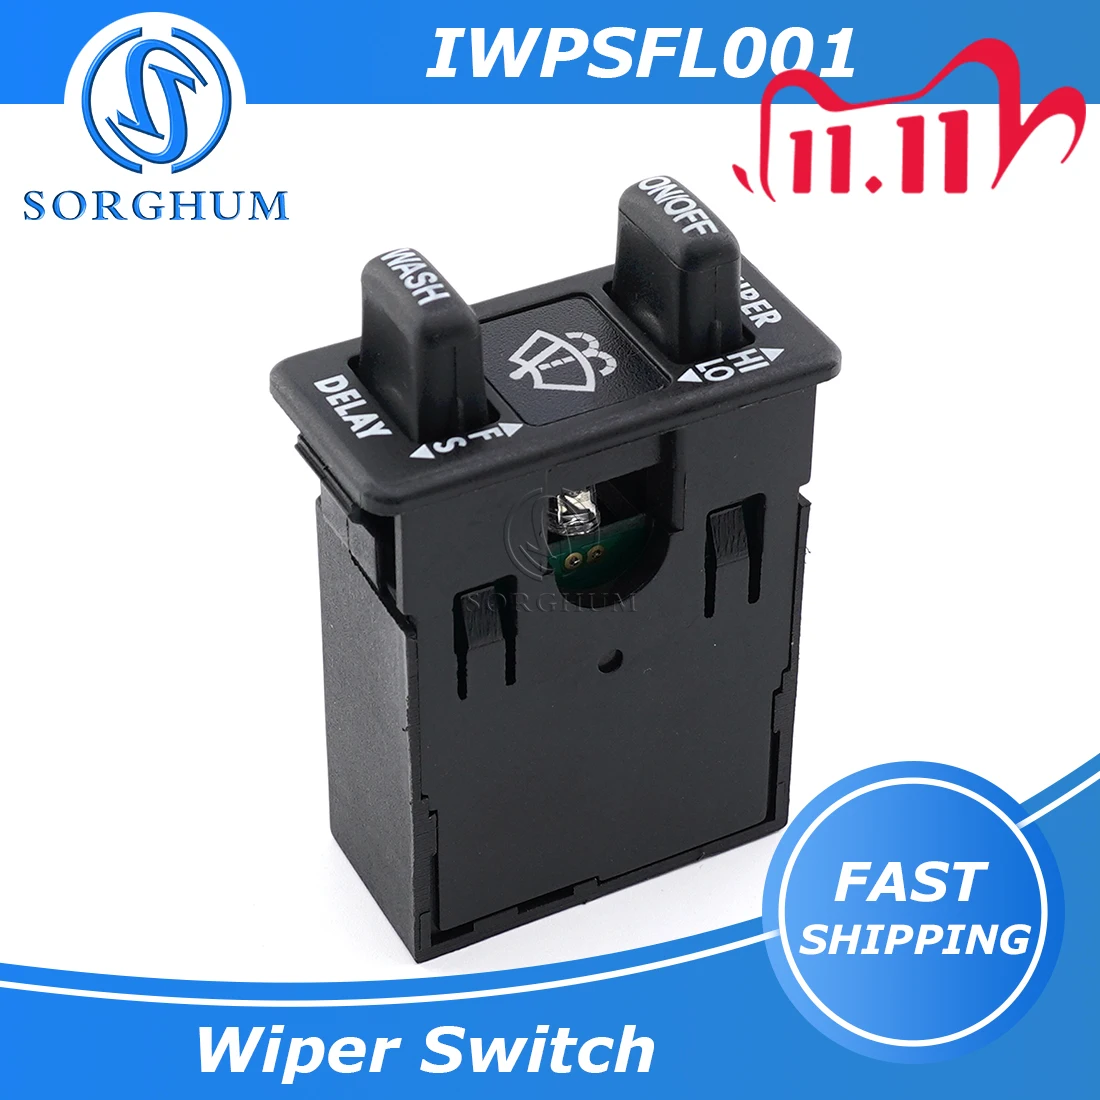 

Sorghum IWPSFL001 New Electric Window Wiper Switch Push Button For Freightliner Columbia Coronado 2001-2017 Car Replacement